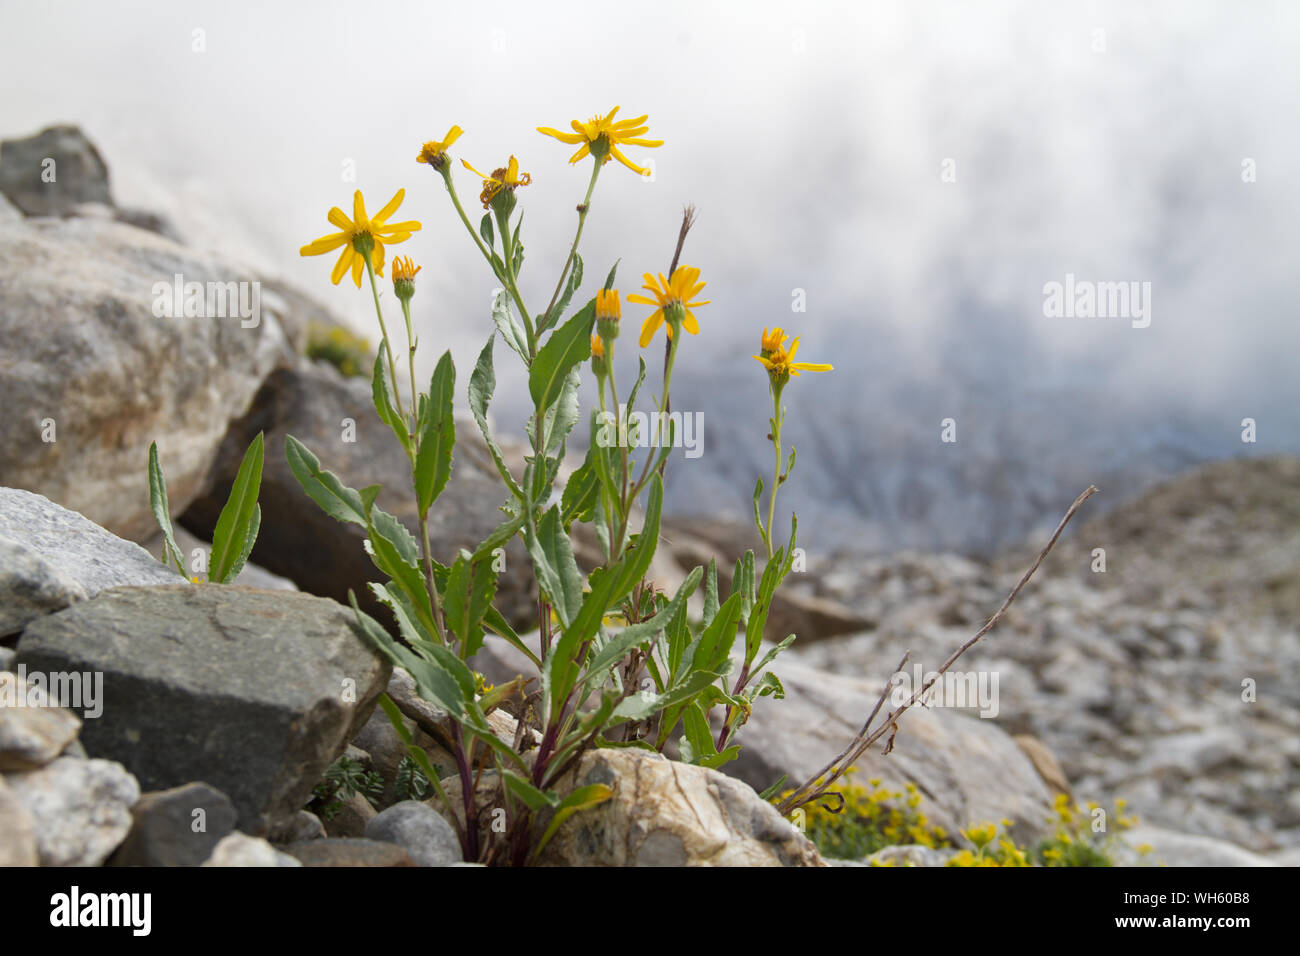 Chamois ragwort, Senecio doronicum, in a rocky environment, in the background misty mountains Stock Photo